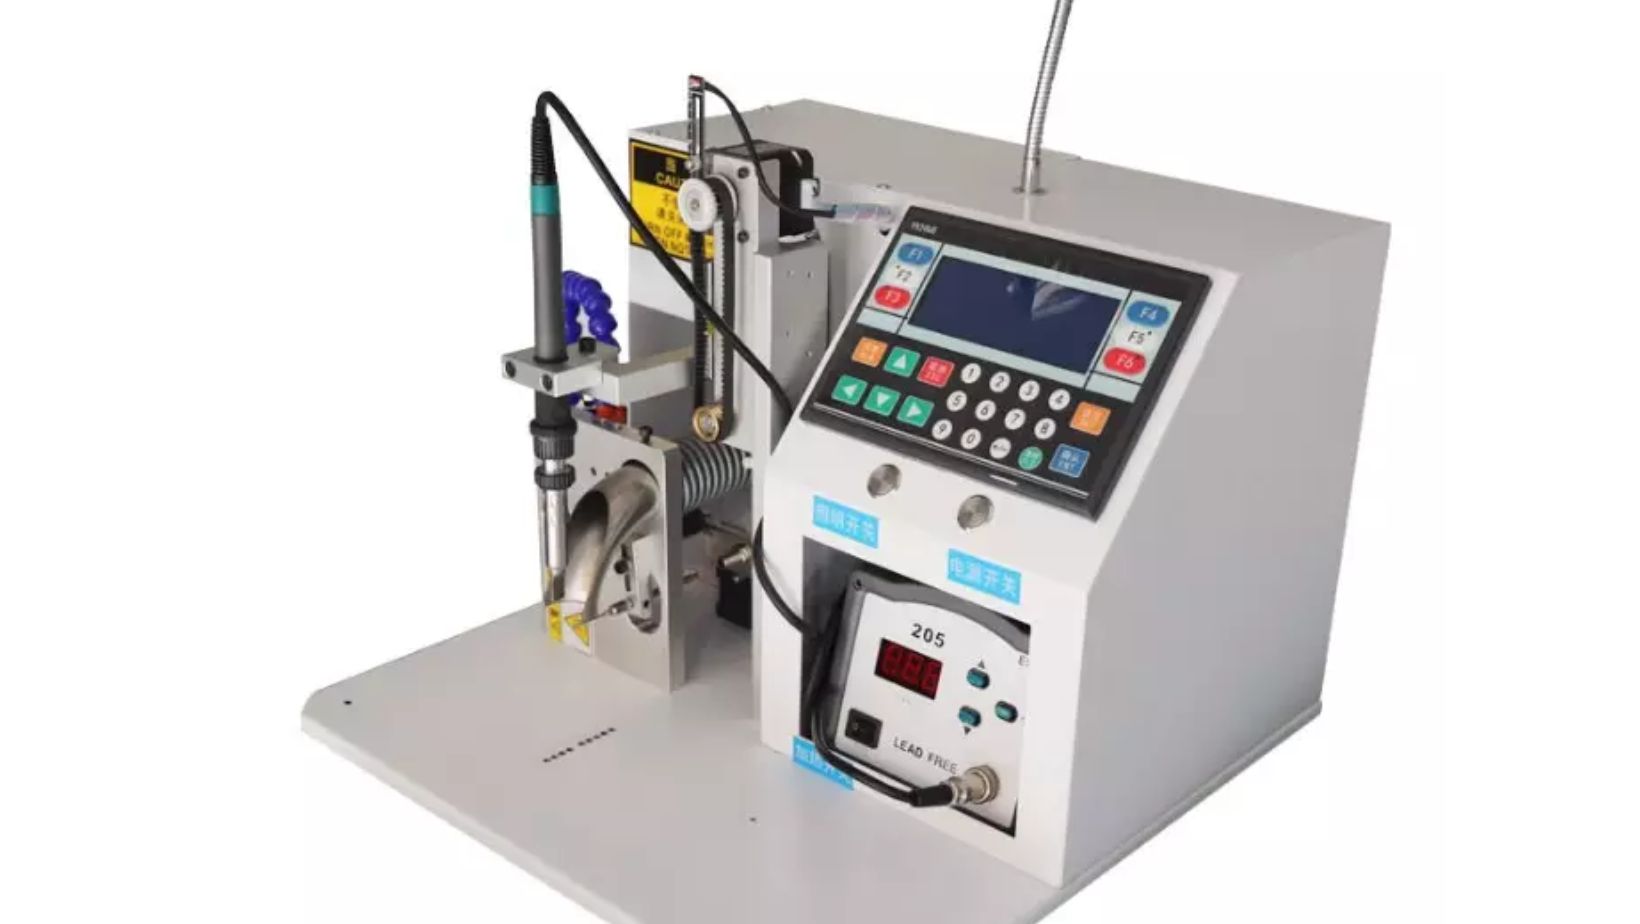 Key Benefits of Using an Automatic Soldering Machine